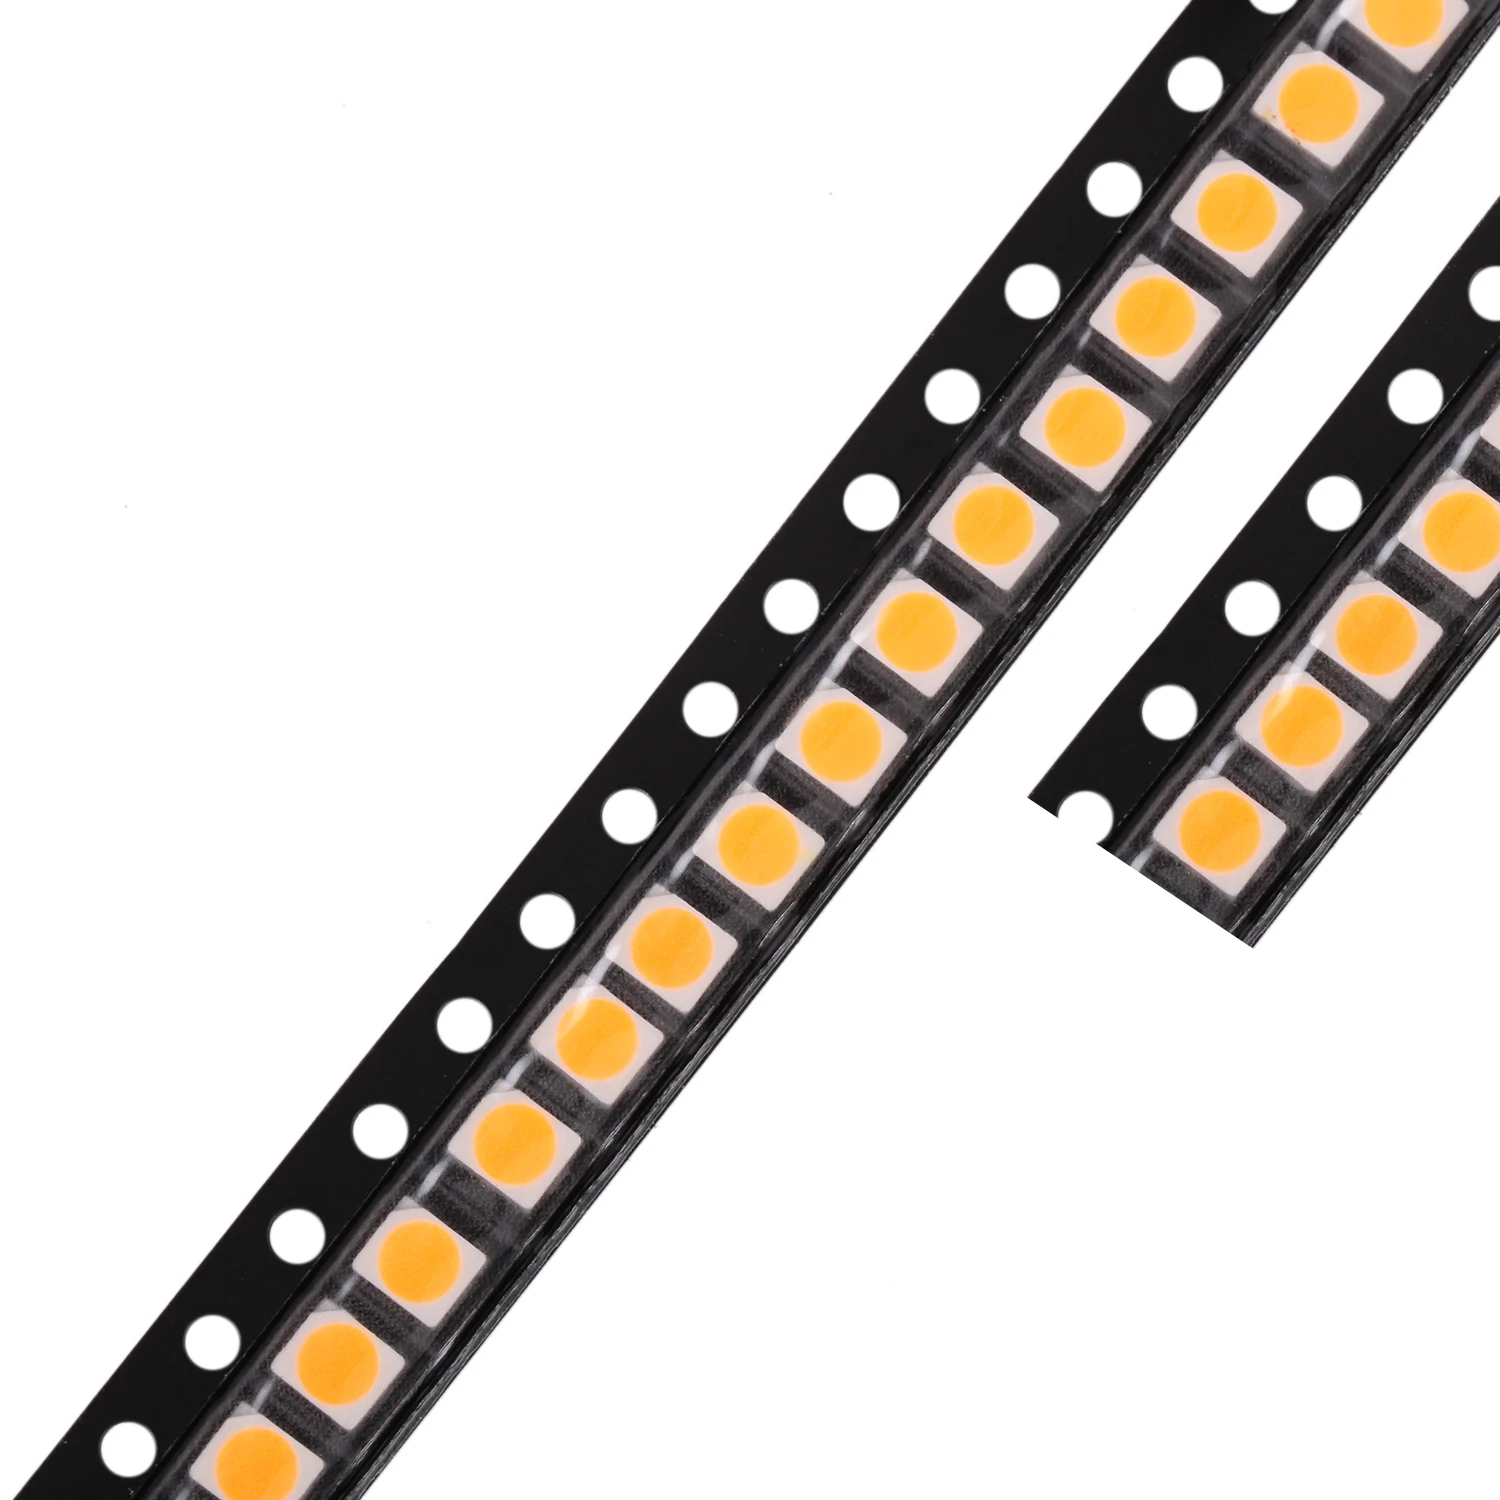 Factory Price Warm White Light LED Beads 3528 SMD LED Chip 3528 Warm White Lighting SMD LED Diode